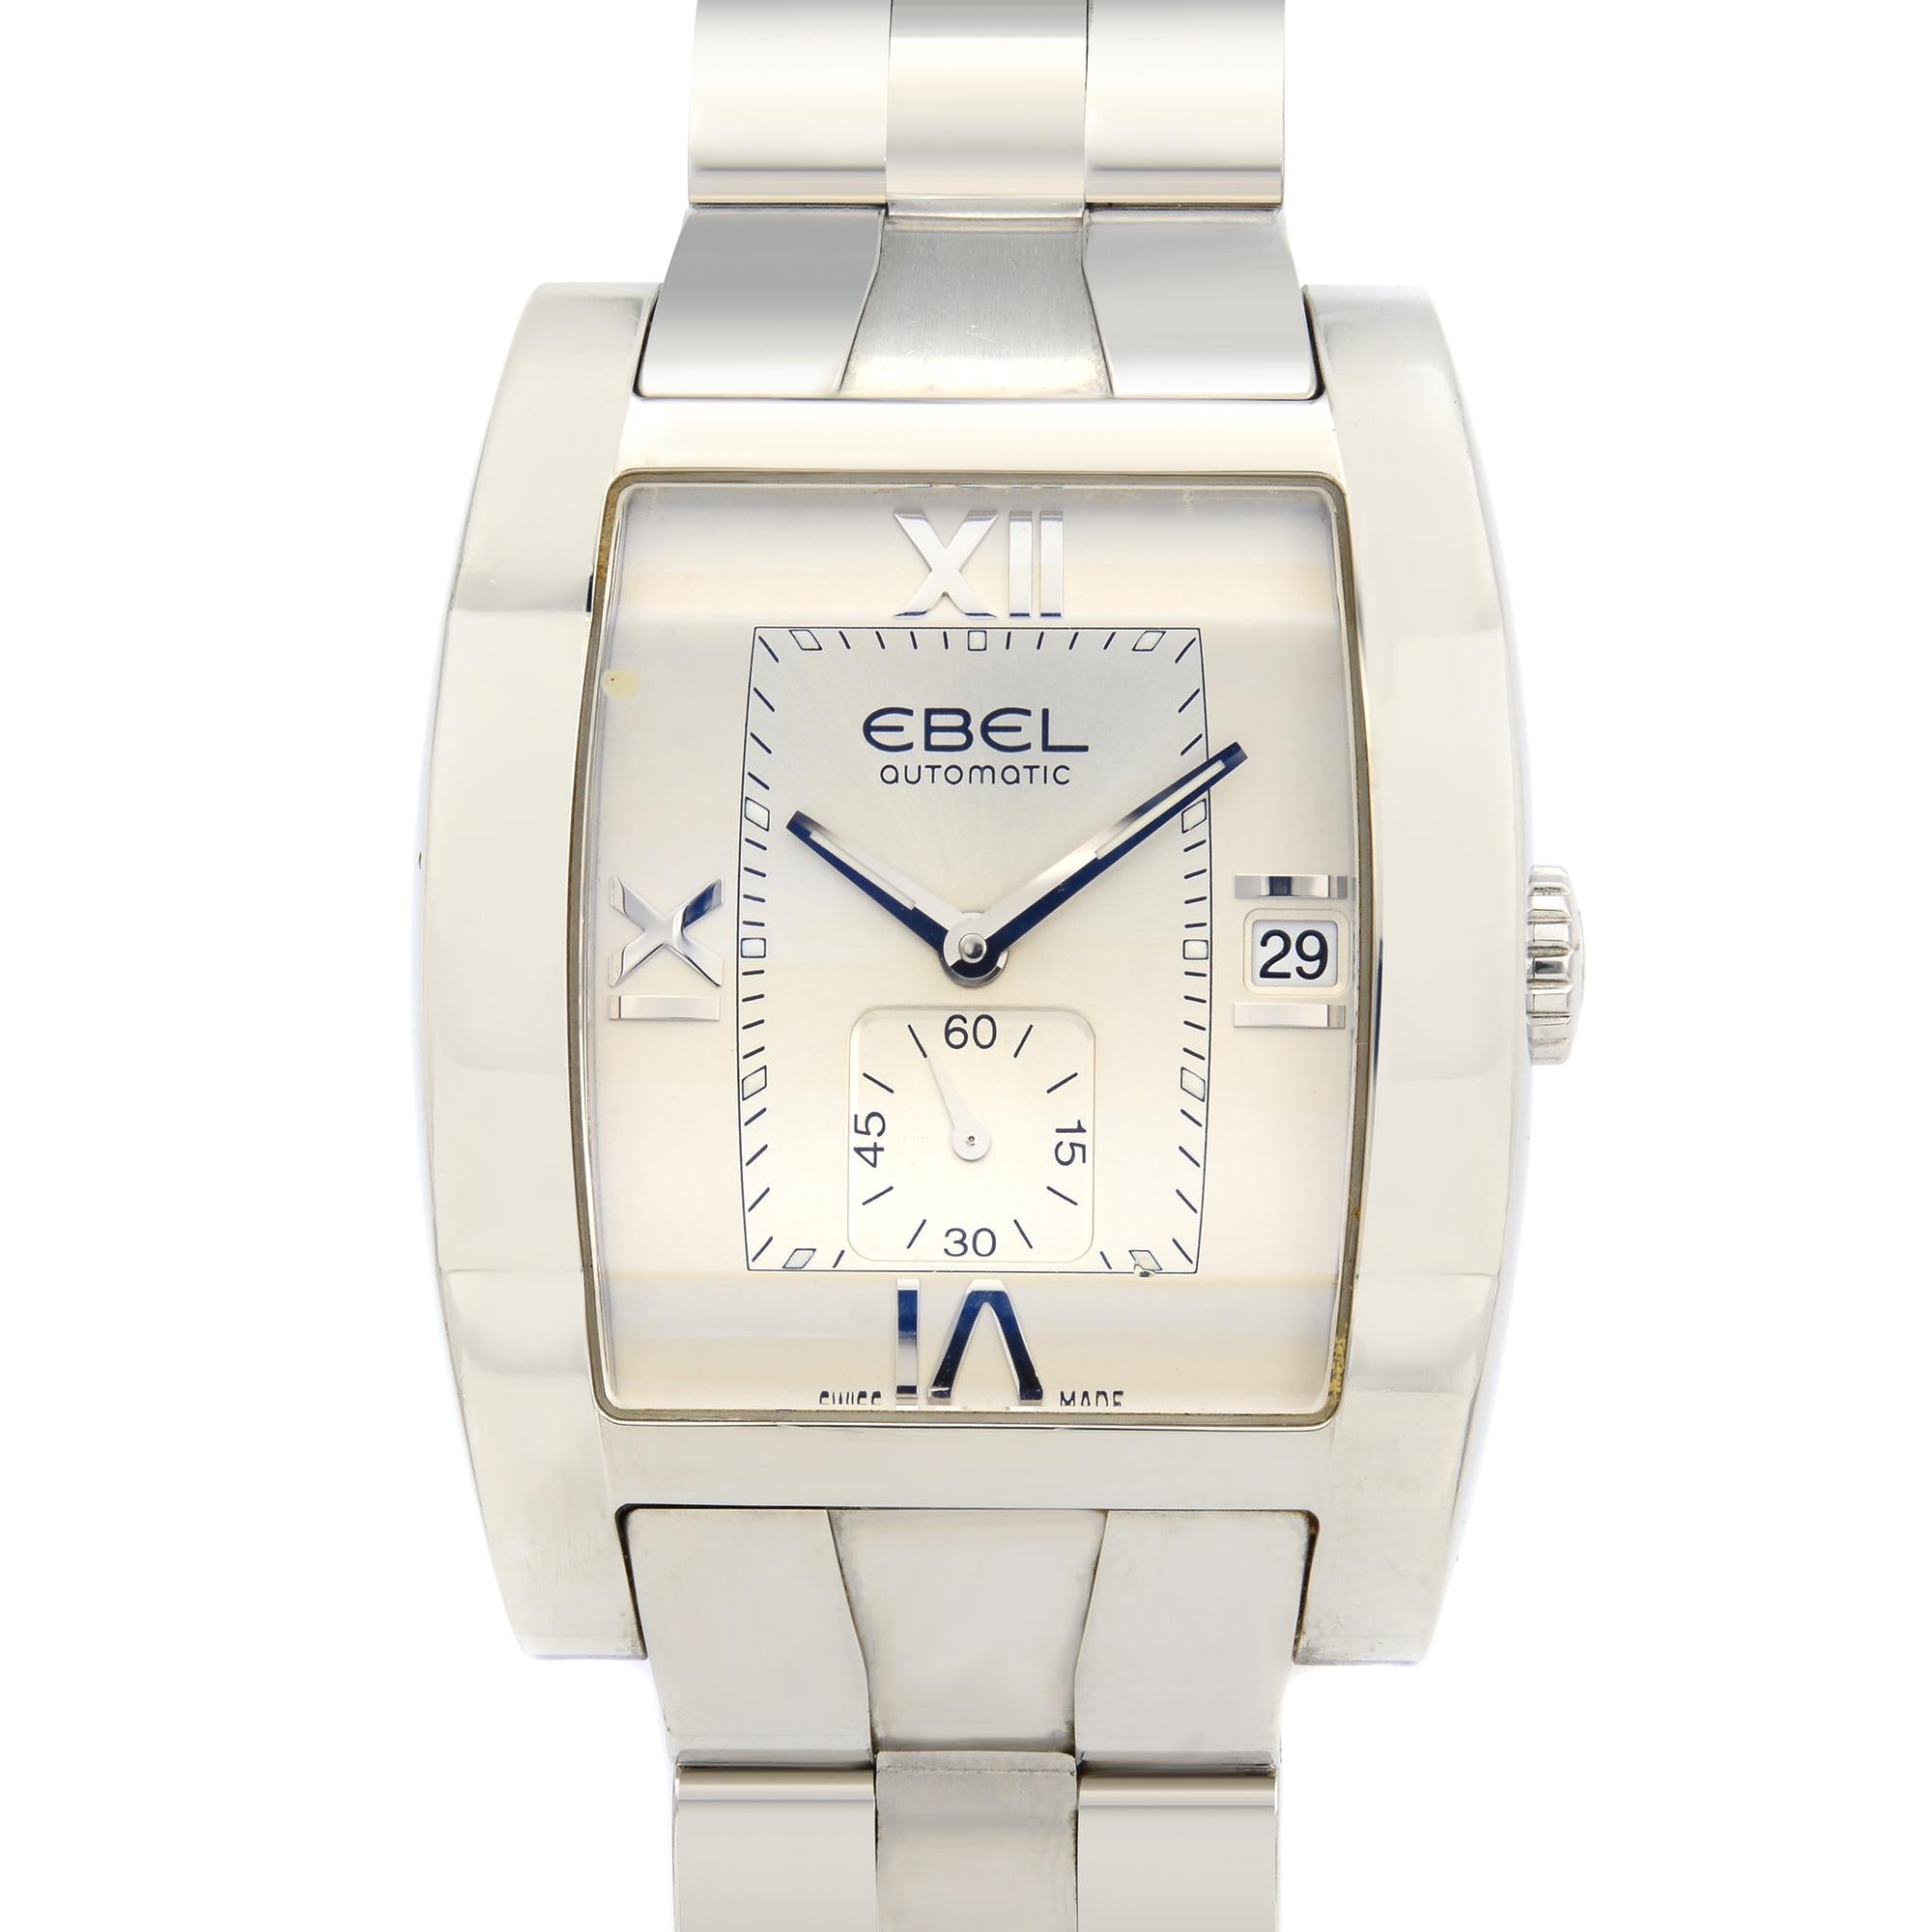 This watch is preowned with a hairline scratch on the crystal at 9 o'clock and a minor chip on the corner. Comes with manufacturer's box, backed by a 1 year Chronostore warranty.
Details:
Model Number E9127J40
Brand EBEL
Department Men
Style